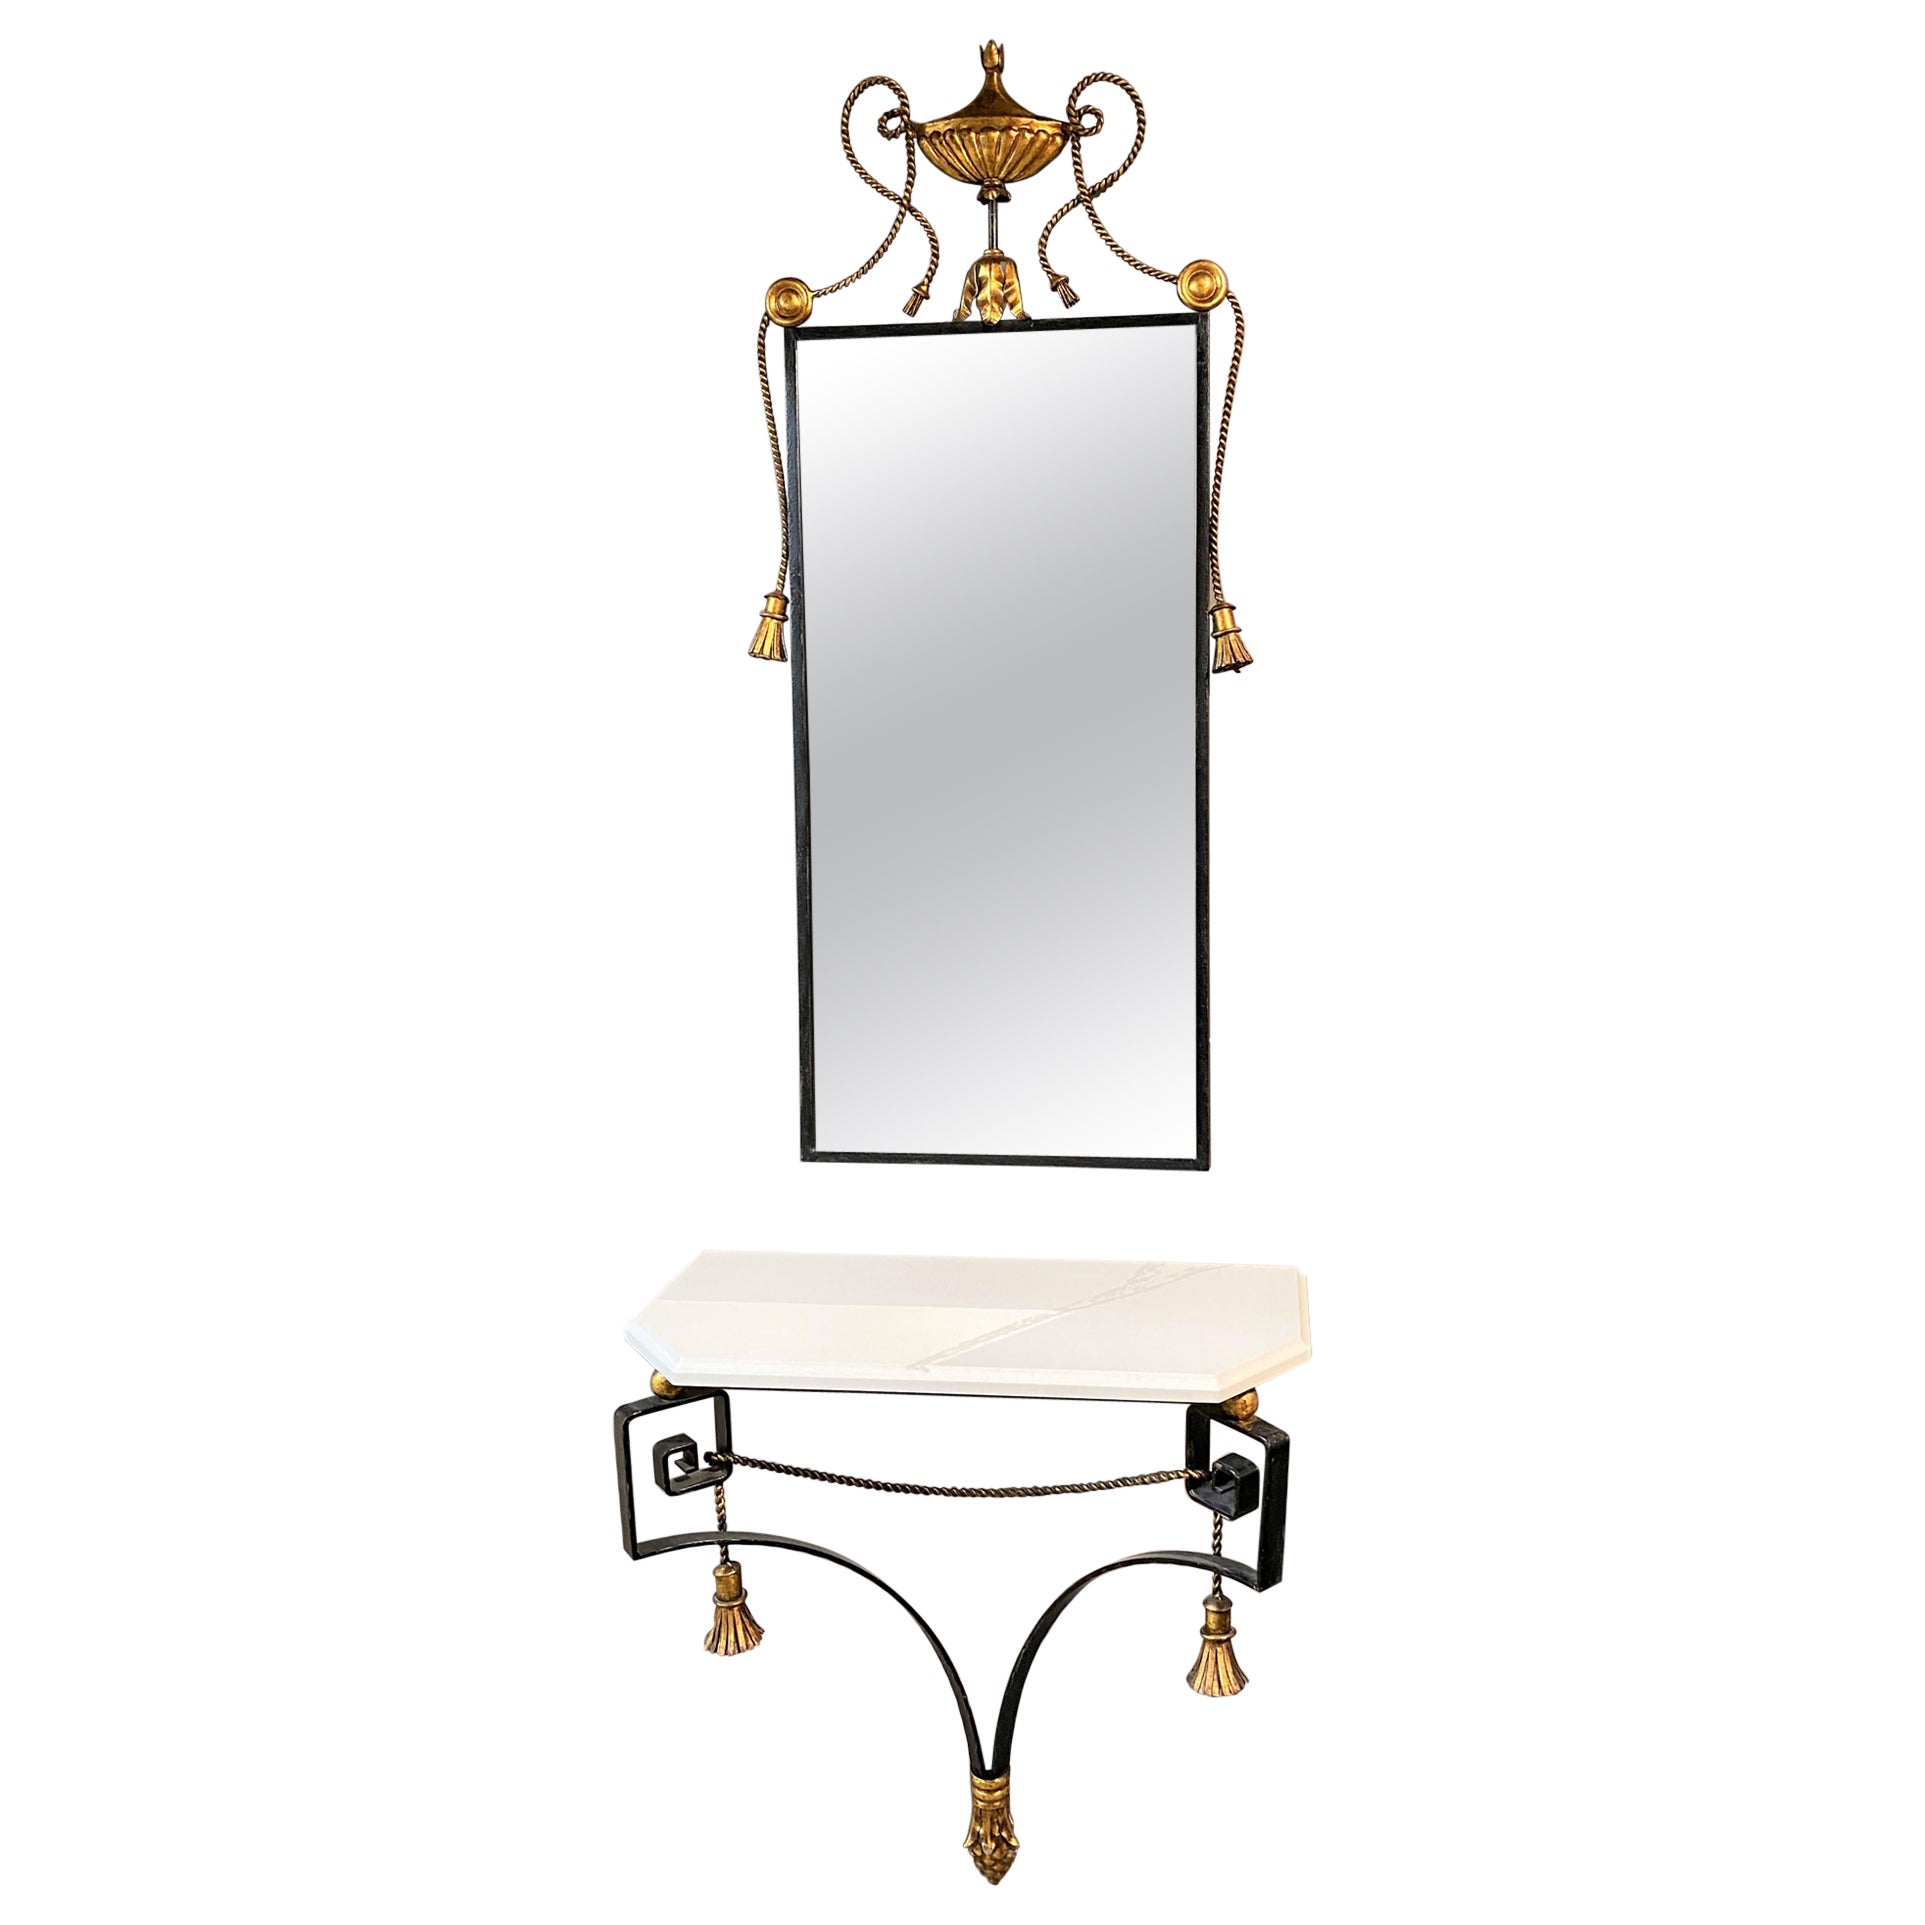 Palladio Furniture Italian Console with Gilded Tassels & Mirror with Urn Crest